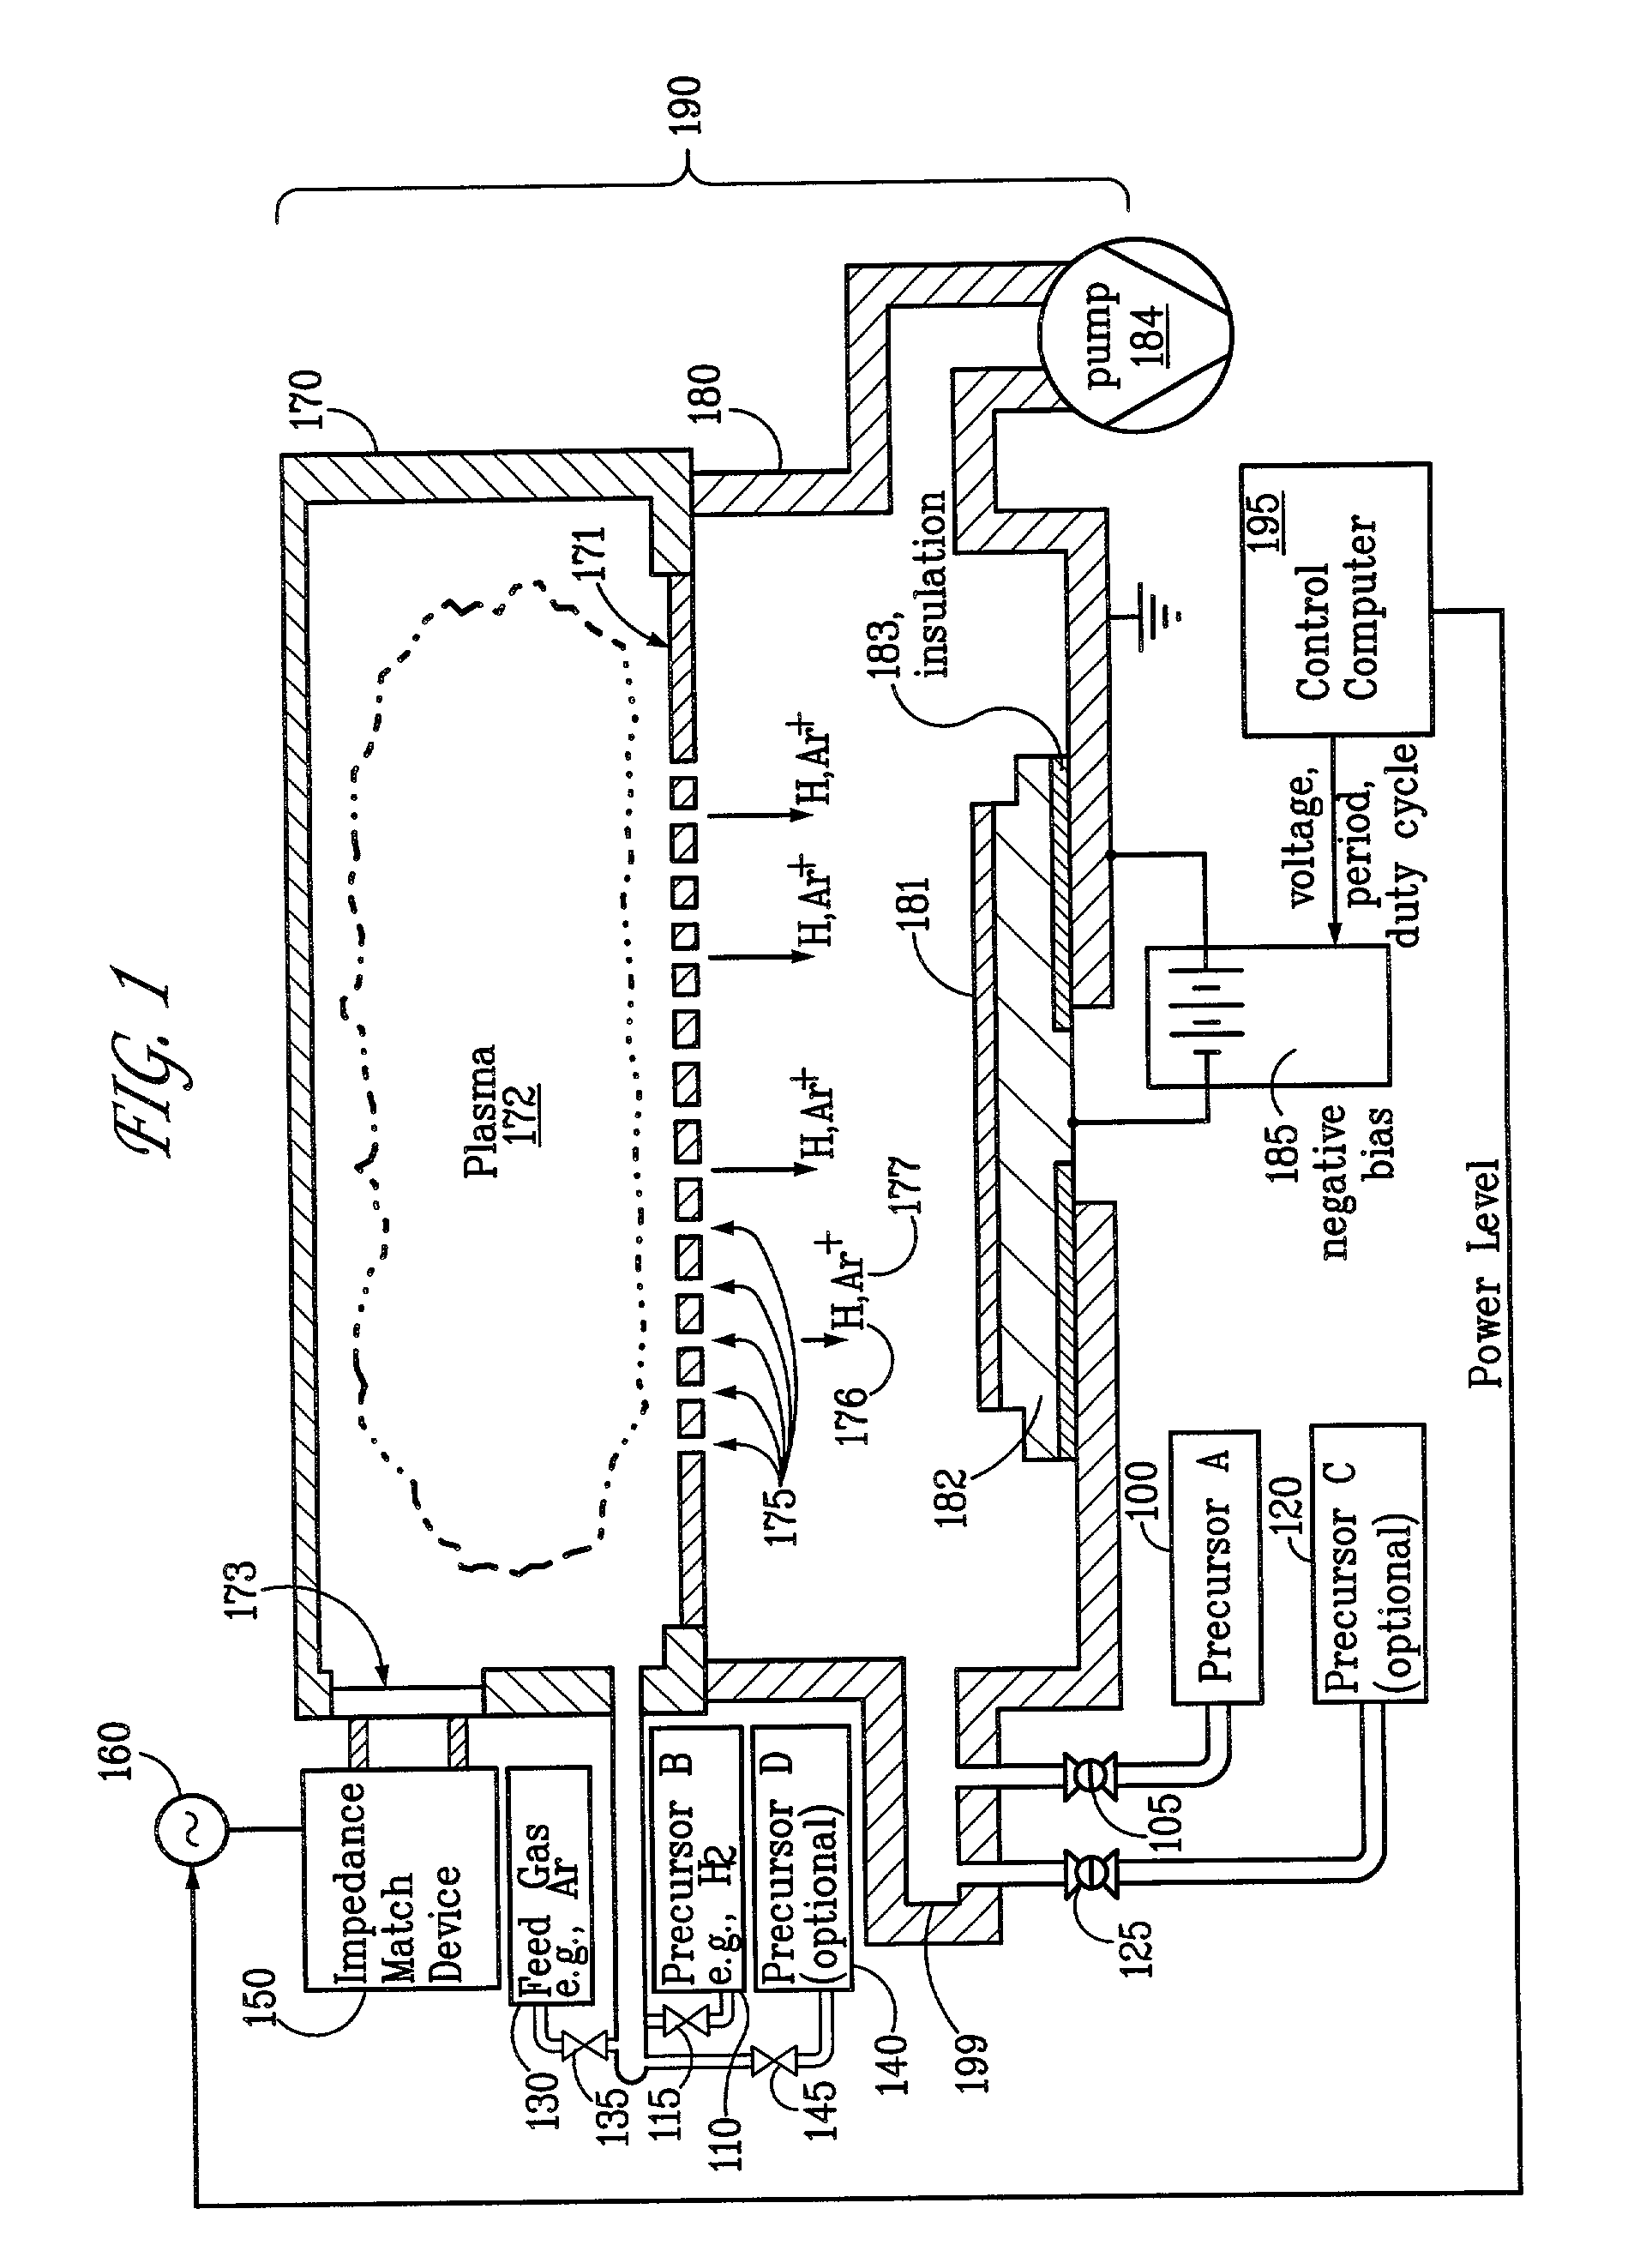 System and method for modulated ion-induced atomic layer deposition (MII-ALD)